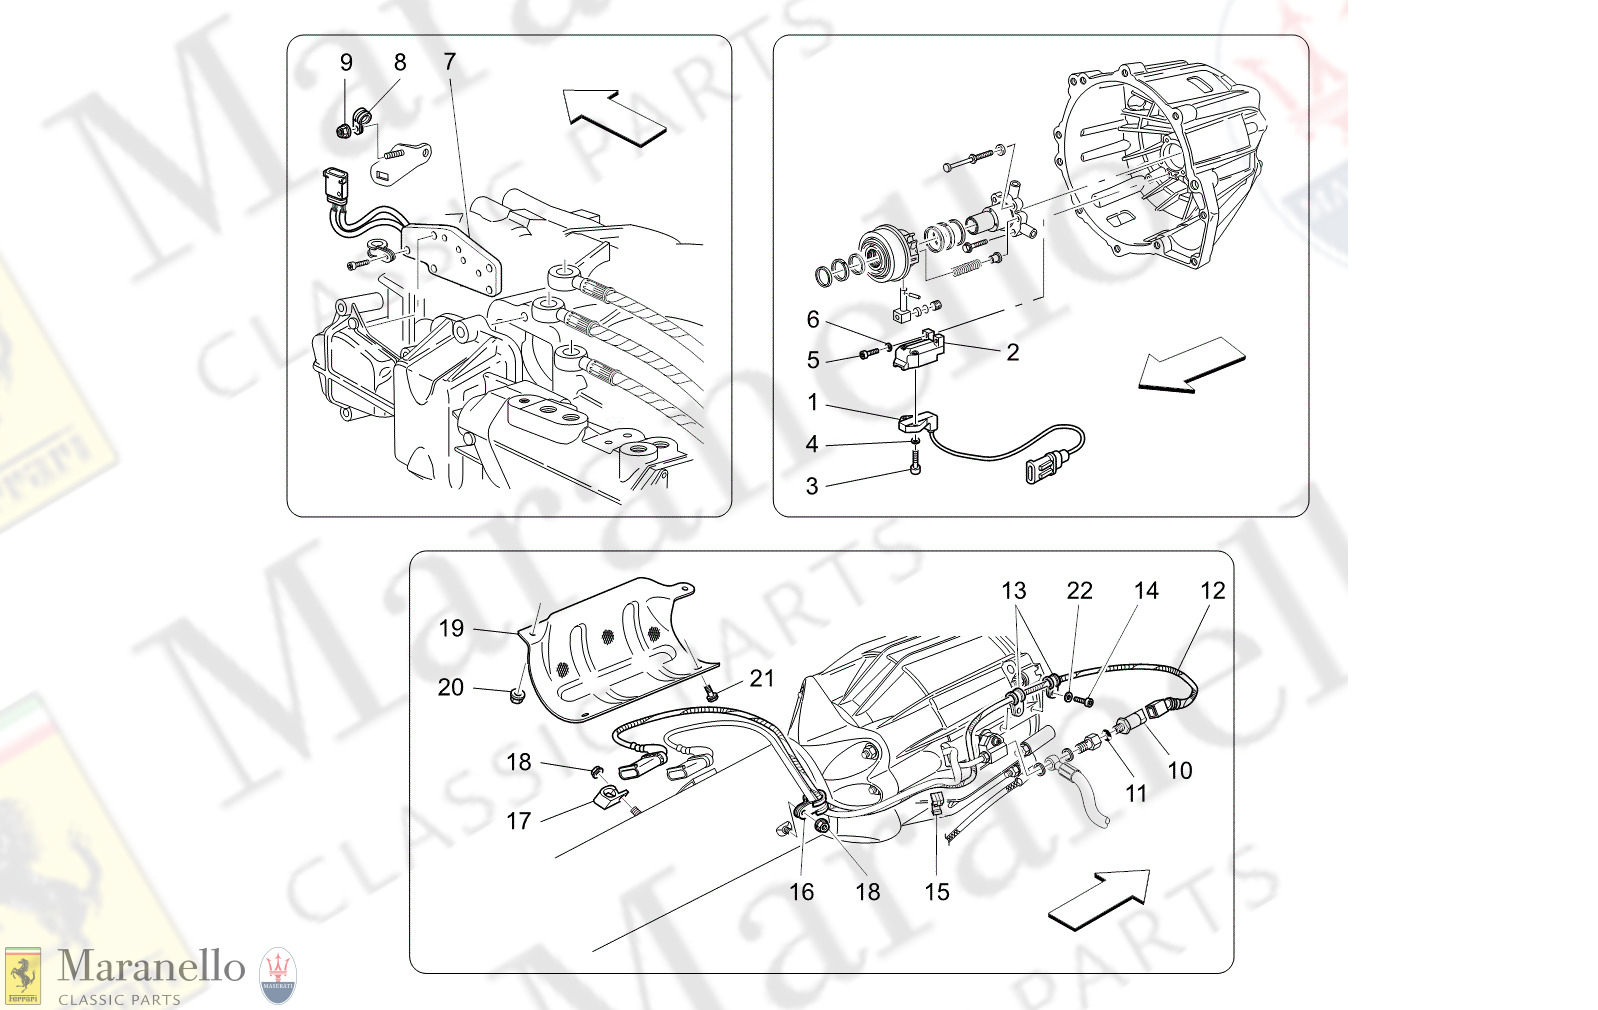 02.90 - 13 - 0290 - 13 Electronic Clutch Control For F1 Gearbox